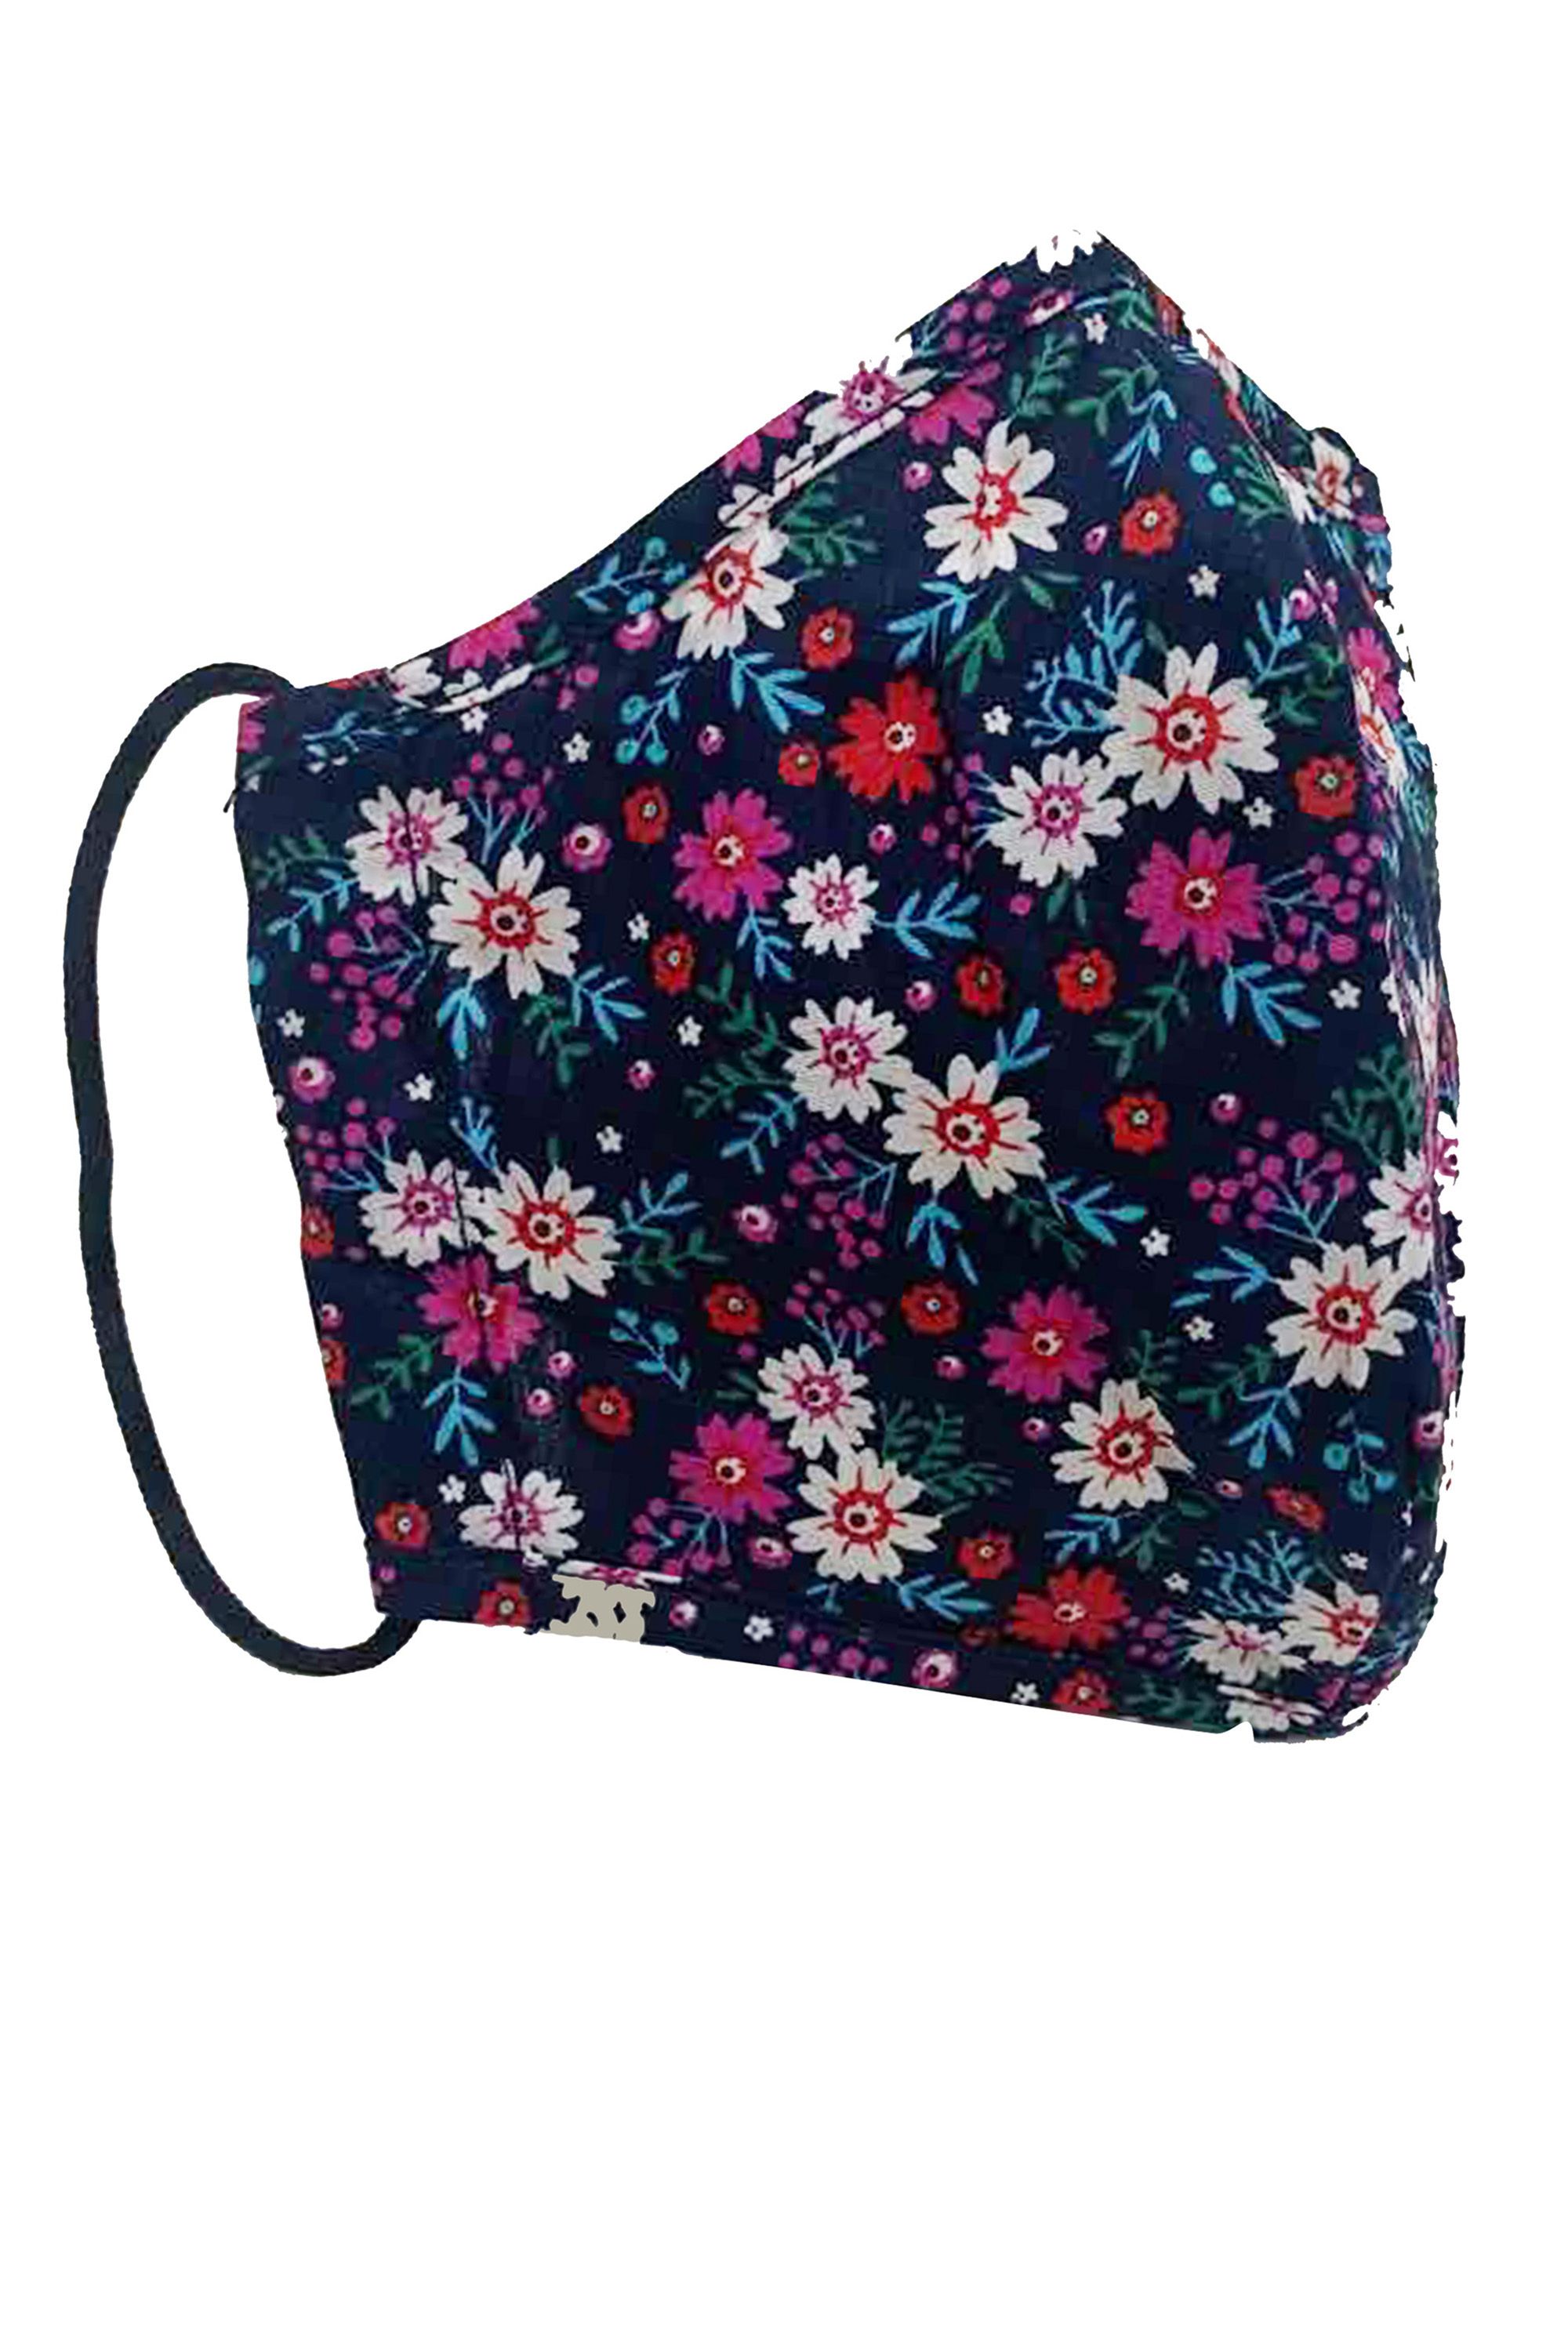 With a fun floral print, this Ditsy Daisy Face Covering is both comfortable and soft. It's made from the end of our fabric rolls, so it's sustainable and kind to the planet.Please remember it is a non-medical mask and not PPE. Wash your hands before and after putting on the covering. One Pound from each covering is donated to Sufra, a charity that supports and provides food for people in extreme poverty.  100% Cotton, Lining:100% Cotton